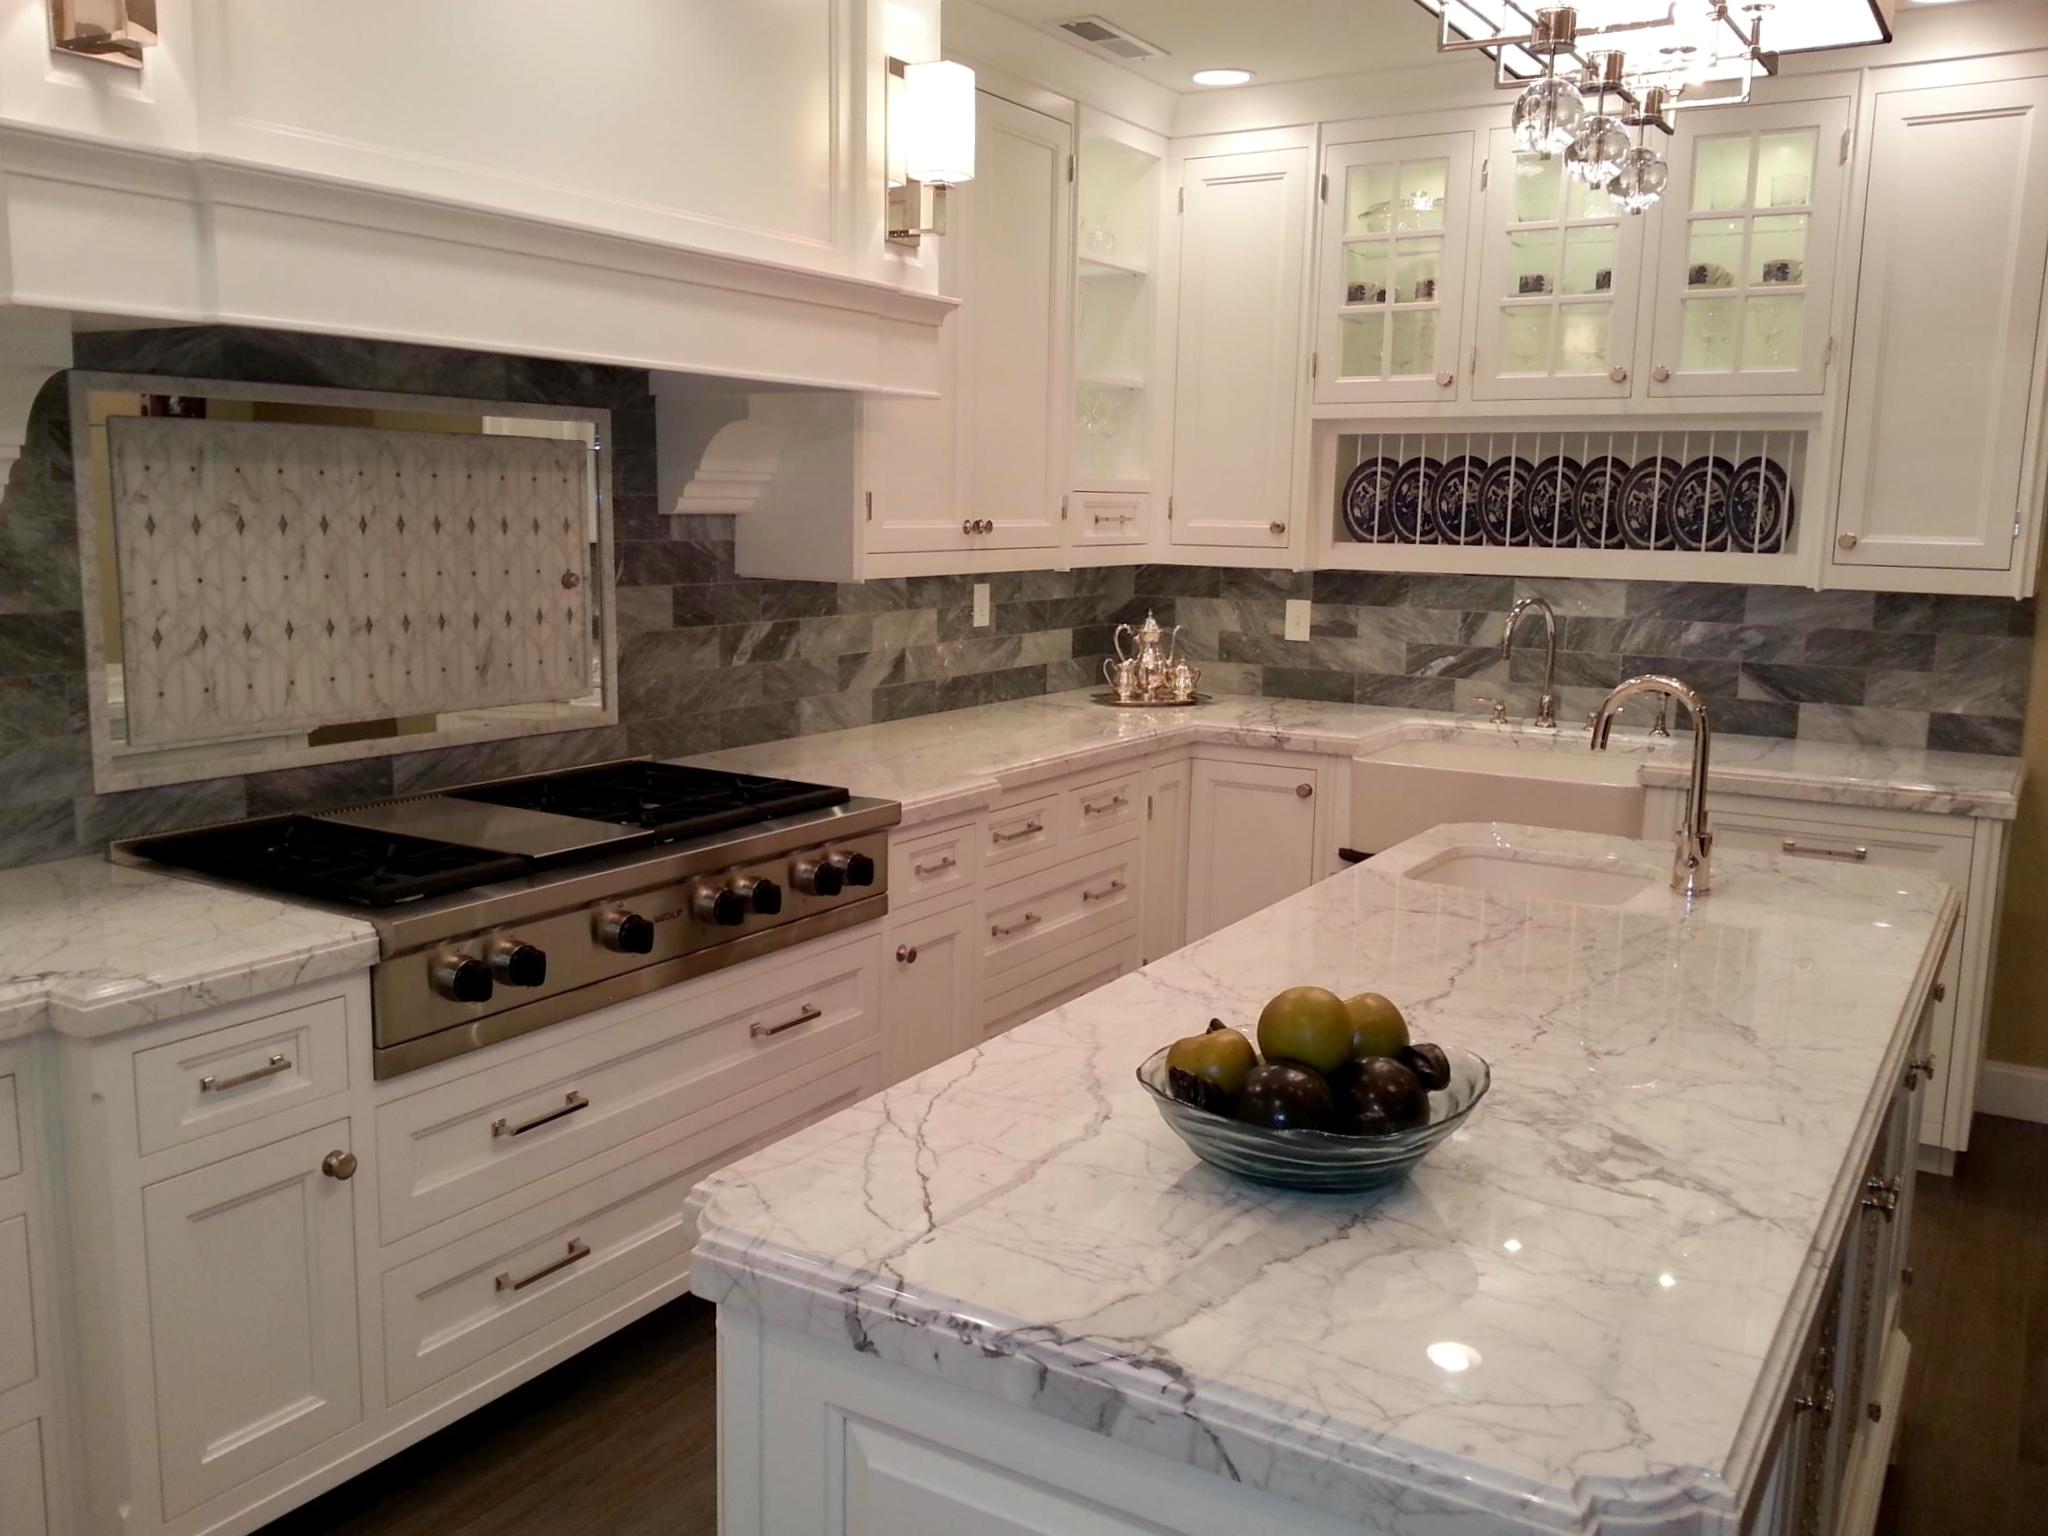 Kitchen-Cabinets-With-Granite-Countertops.jpg